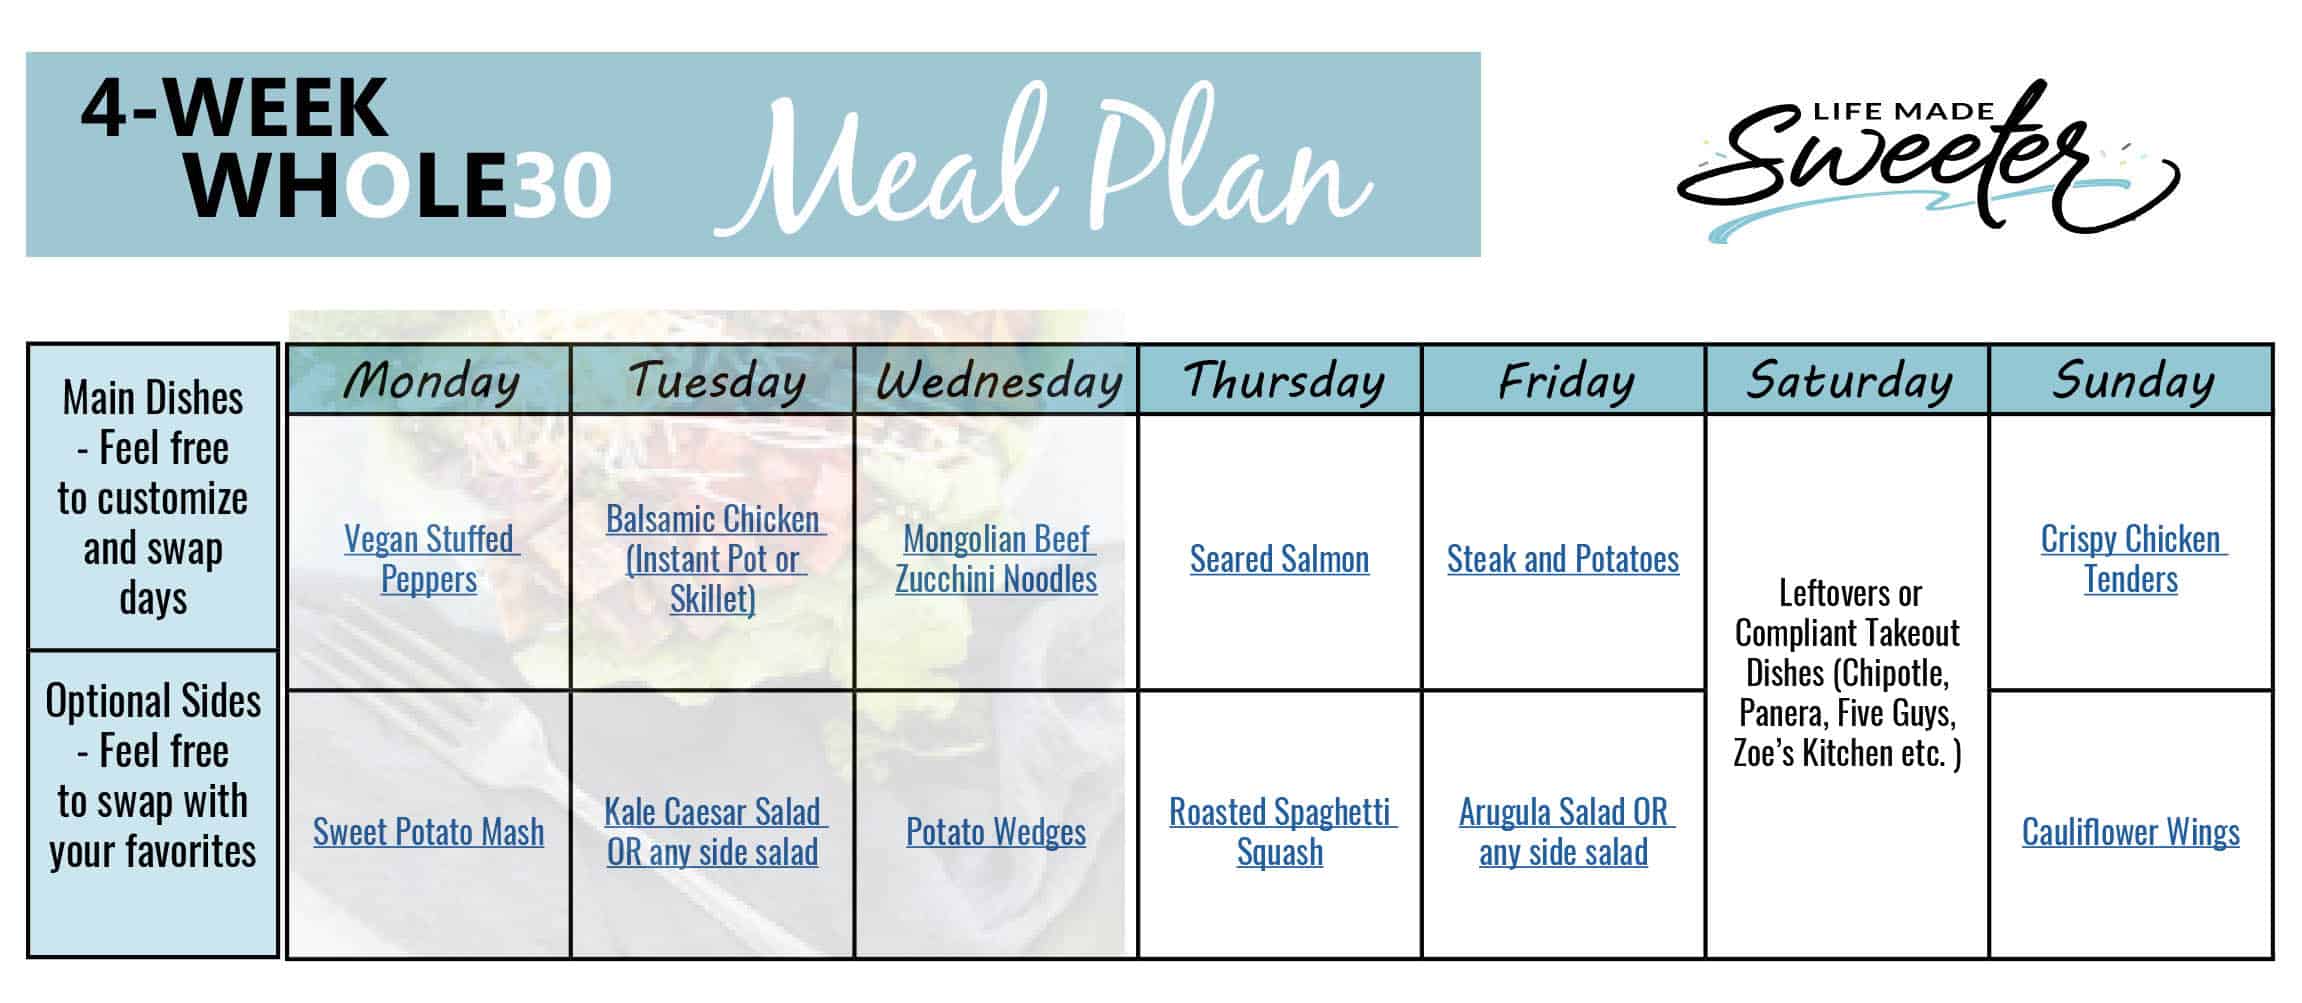 https://lifemadesweeter.com/whole30-meal-plan/the-whole30-meal-plan-week-4/